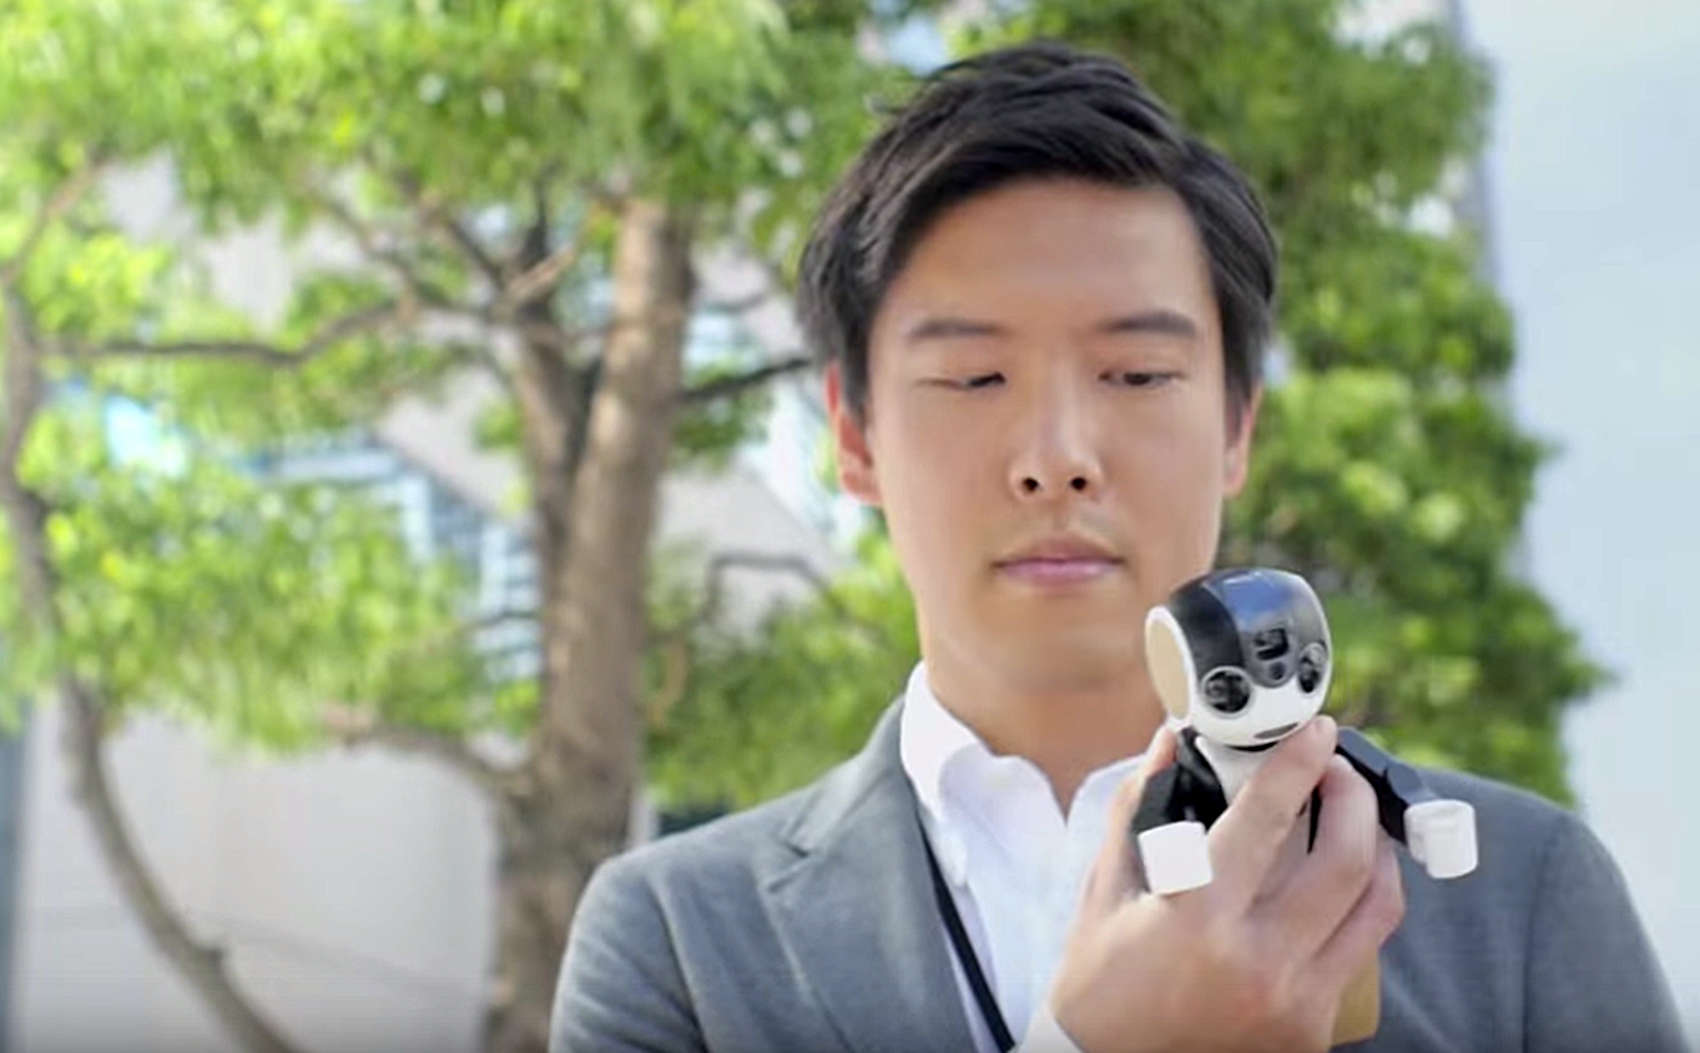 This guy has traded in his smartphone for a RoBoHon.